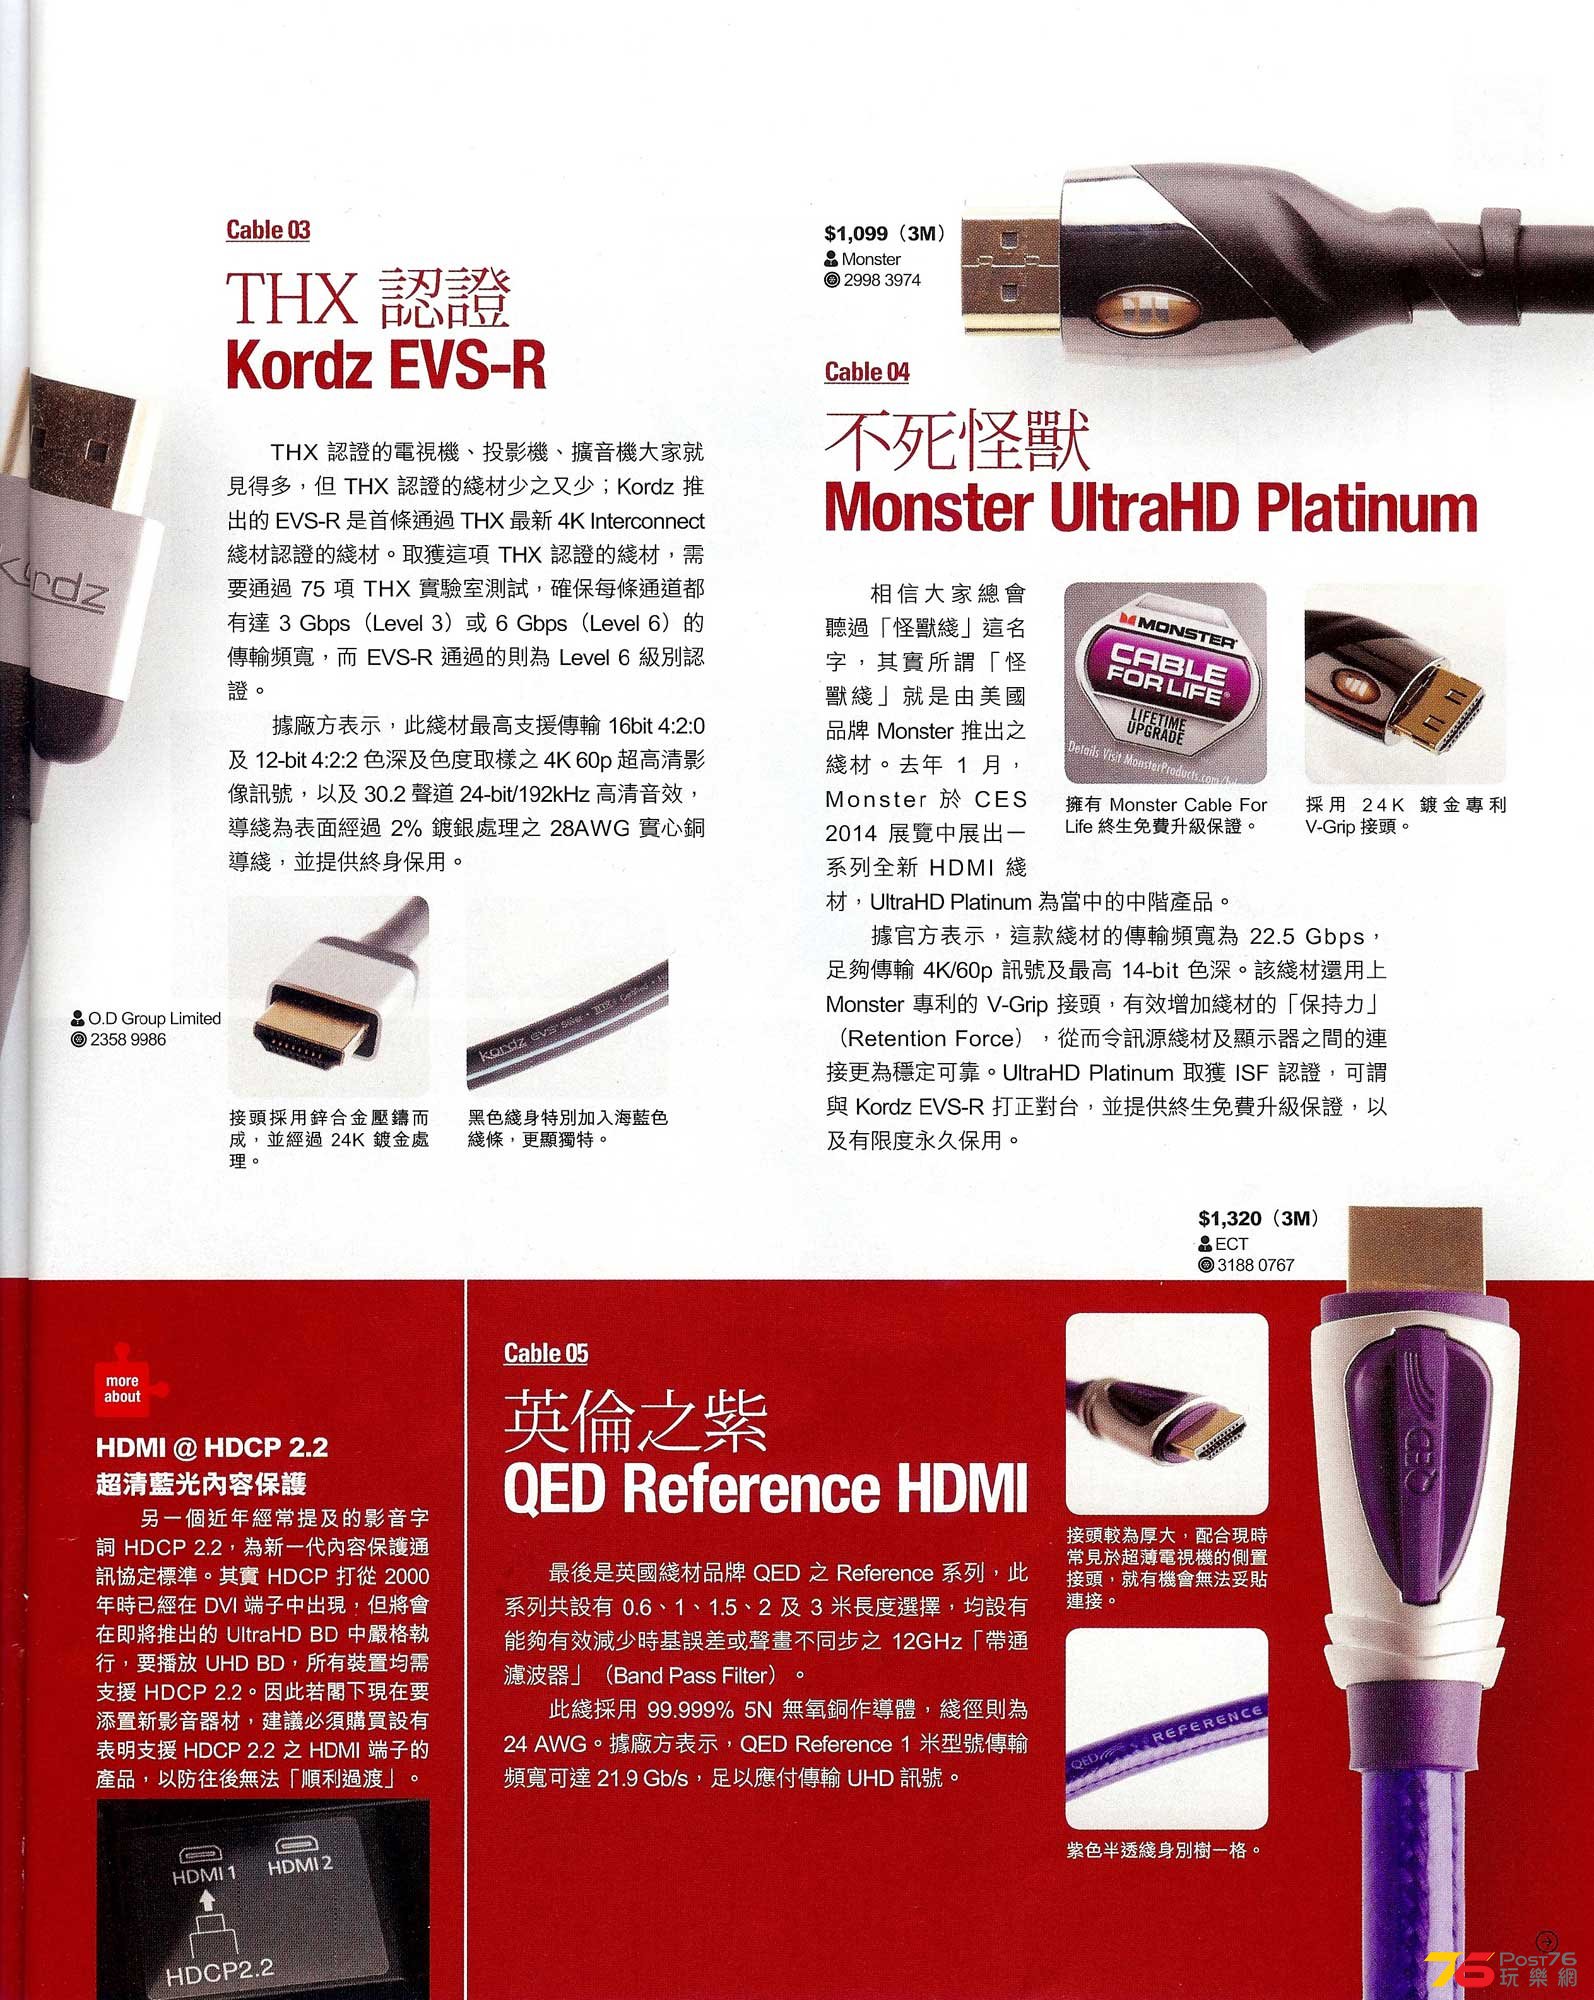 KDZ-AD-T-150611(A)_e-zone_issue878_EVS-R_Page_4.jpg